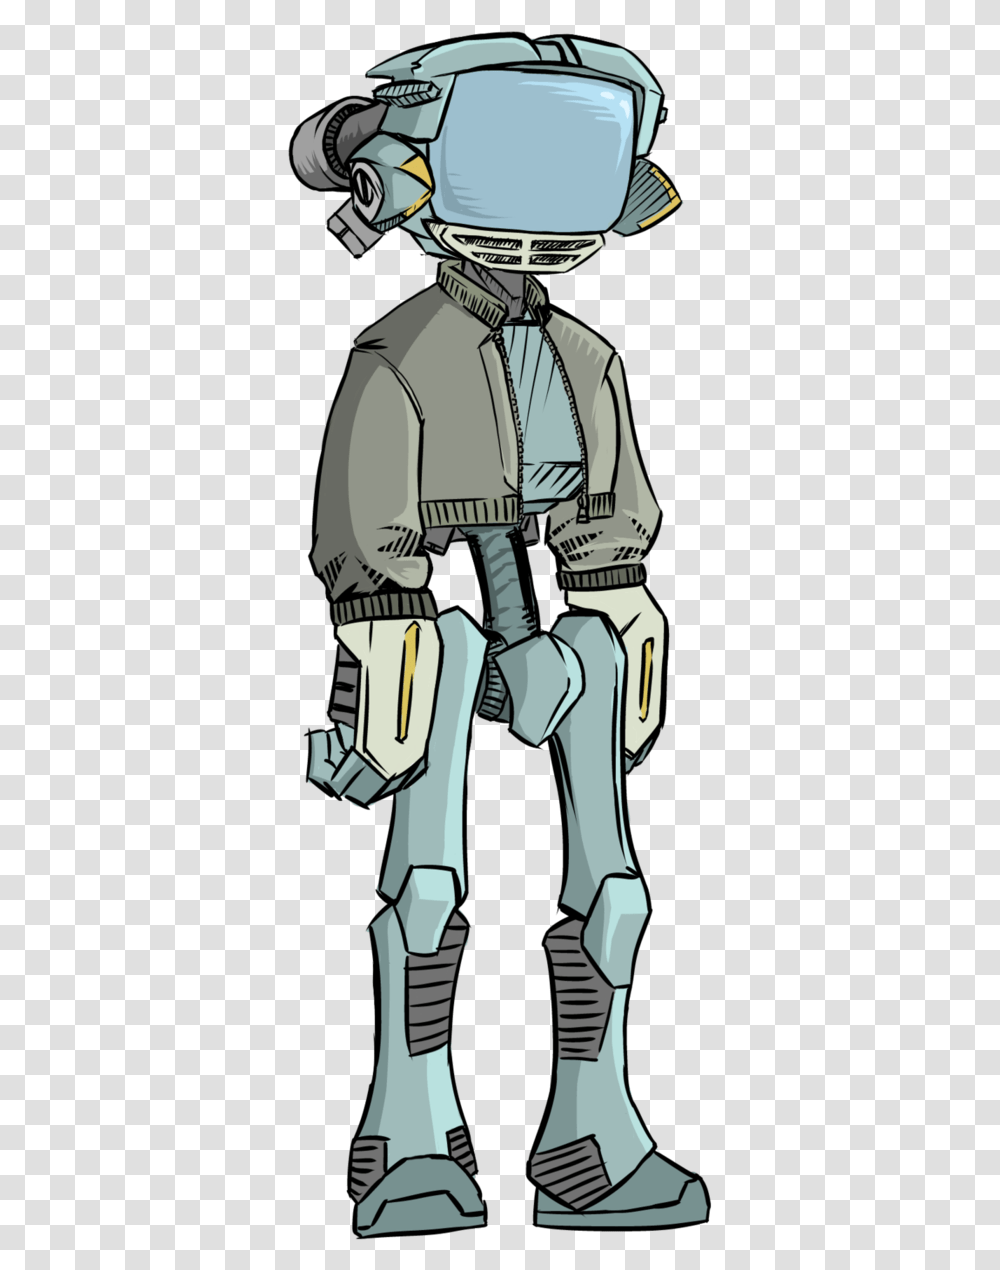 Flcl 7 Image Fooly Cooly Canti, Helmet, Person, Coat Transparent Png